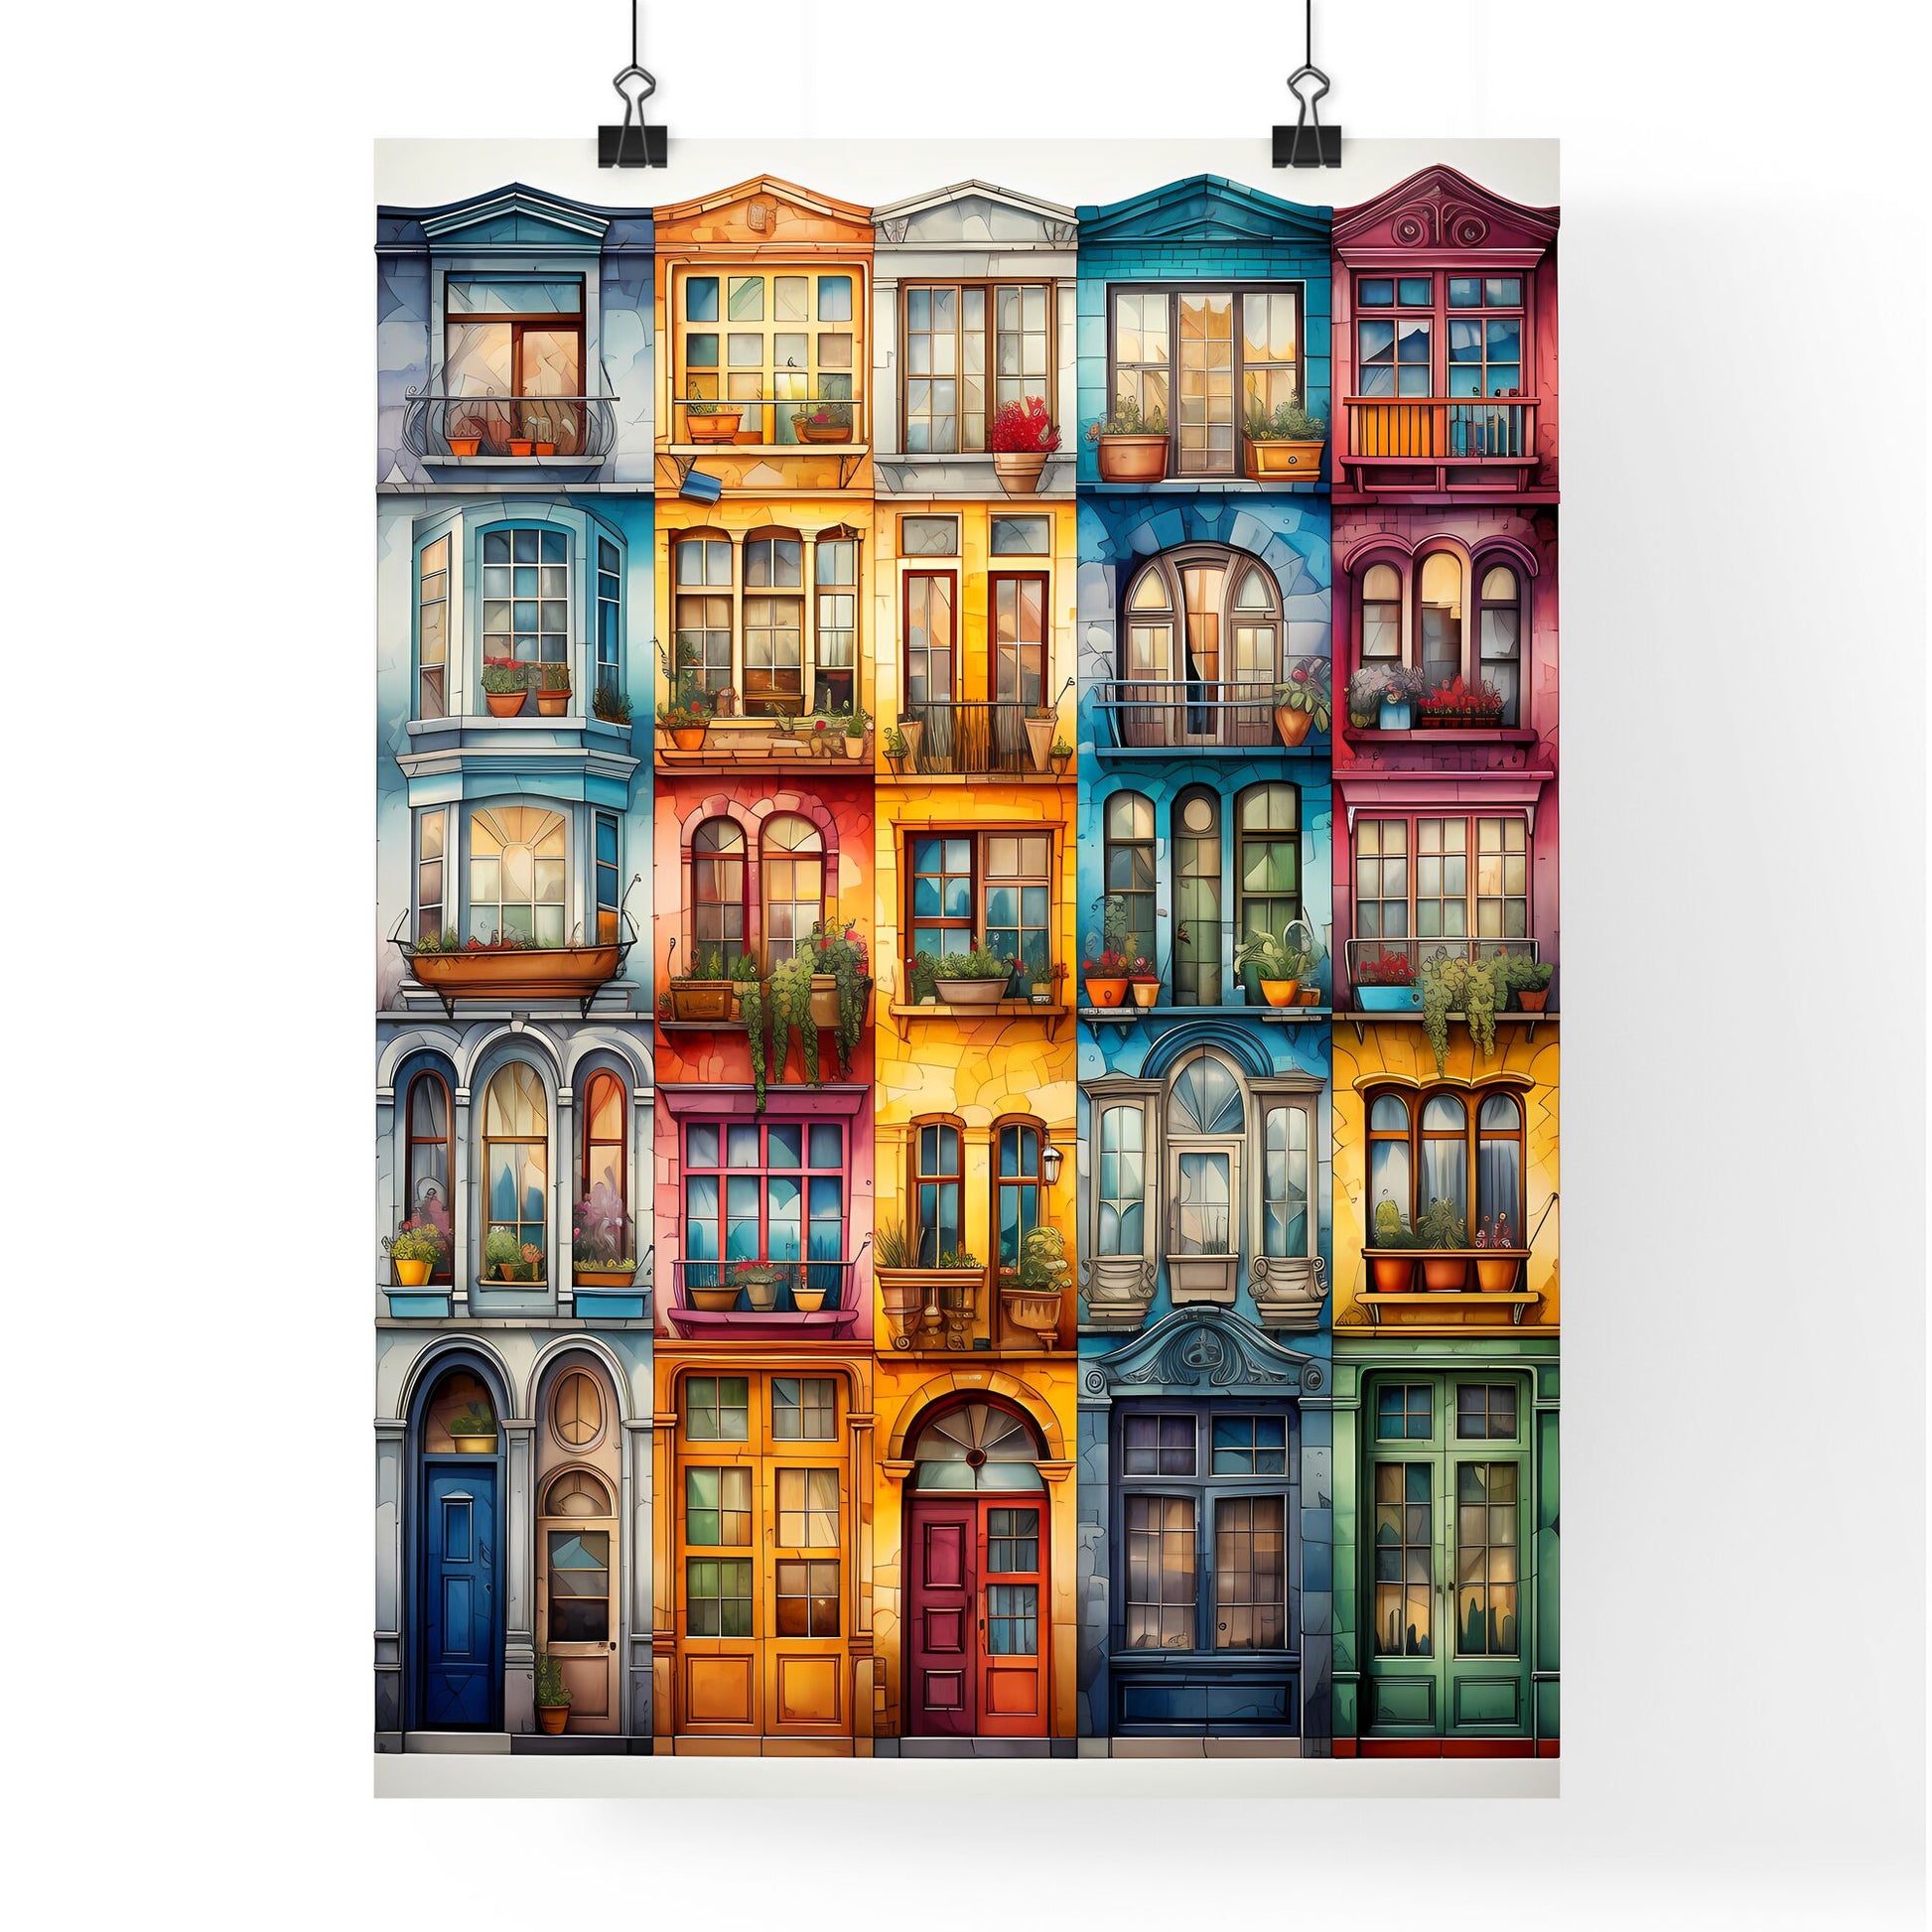 32 Multicolored Tradition Windows From Russian Town - A Collage Of Colorful Buildings Default Title